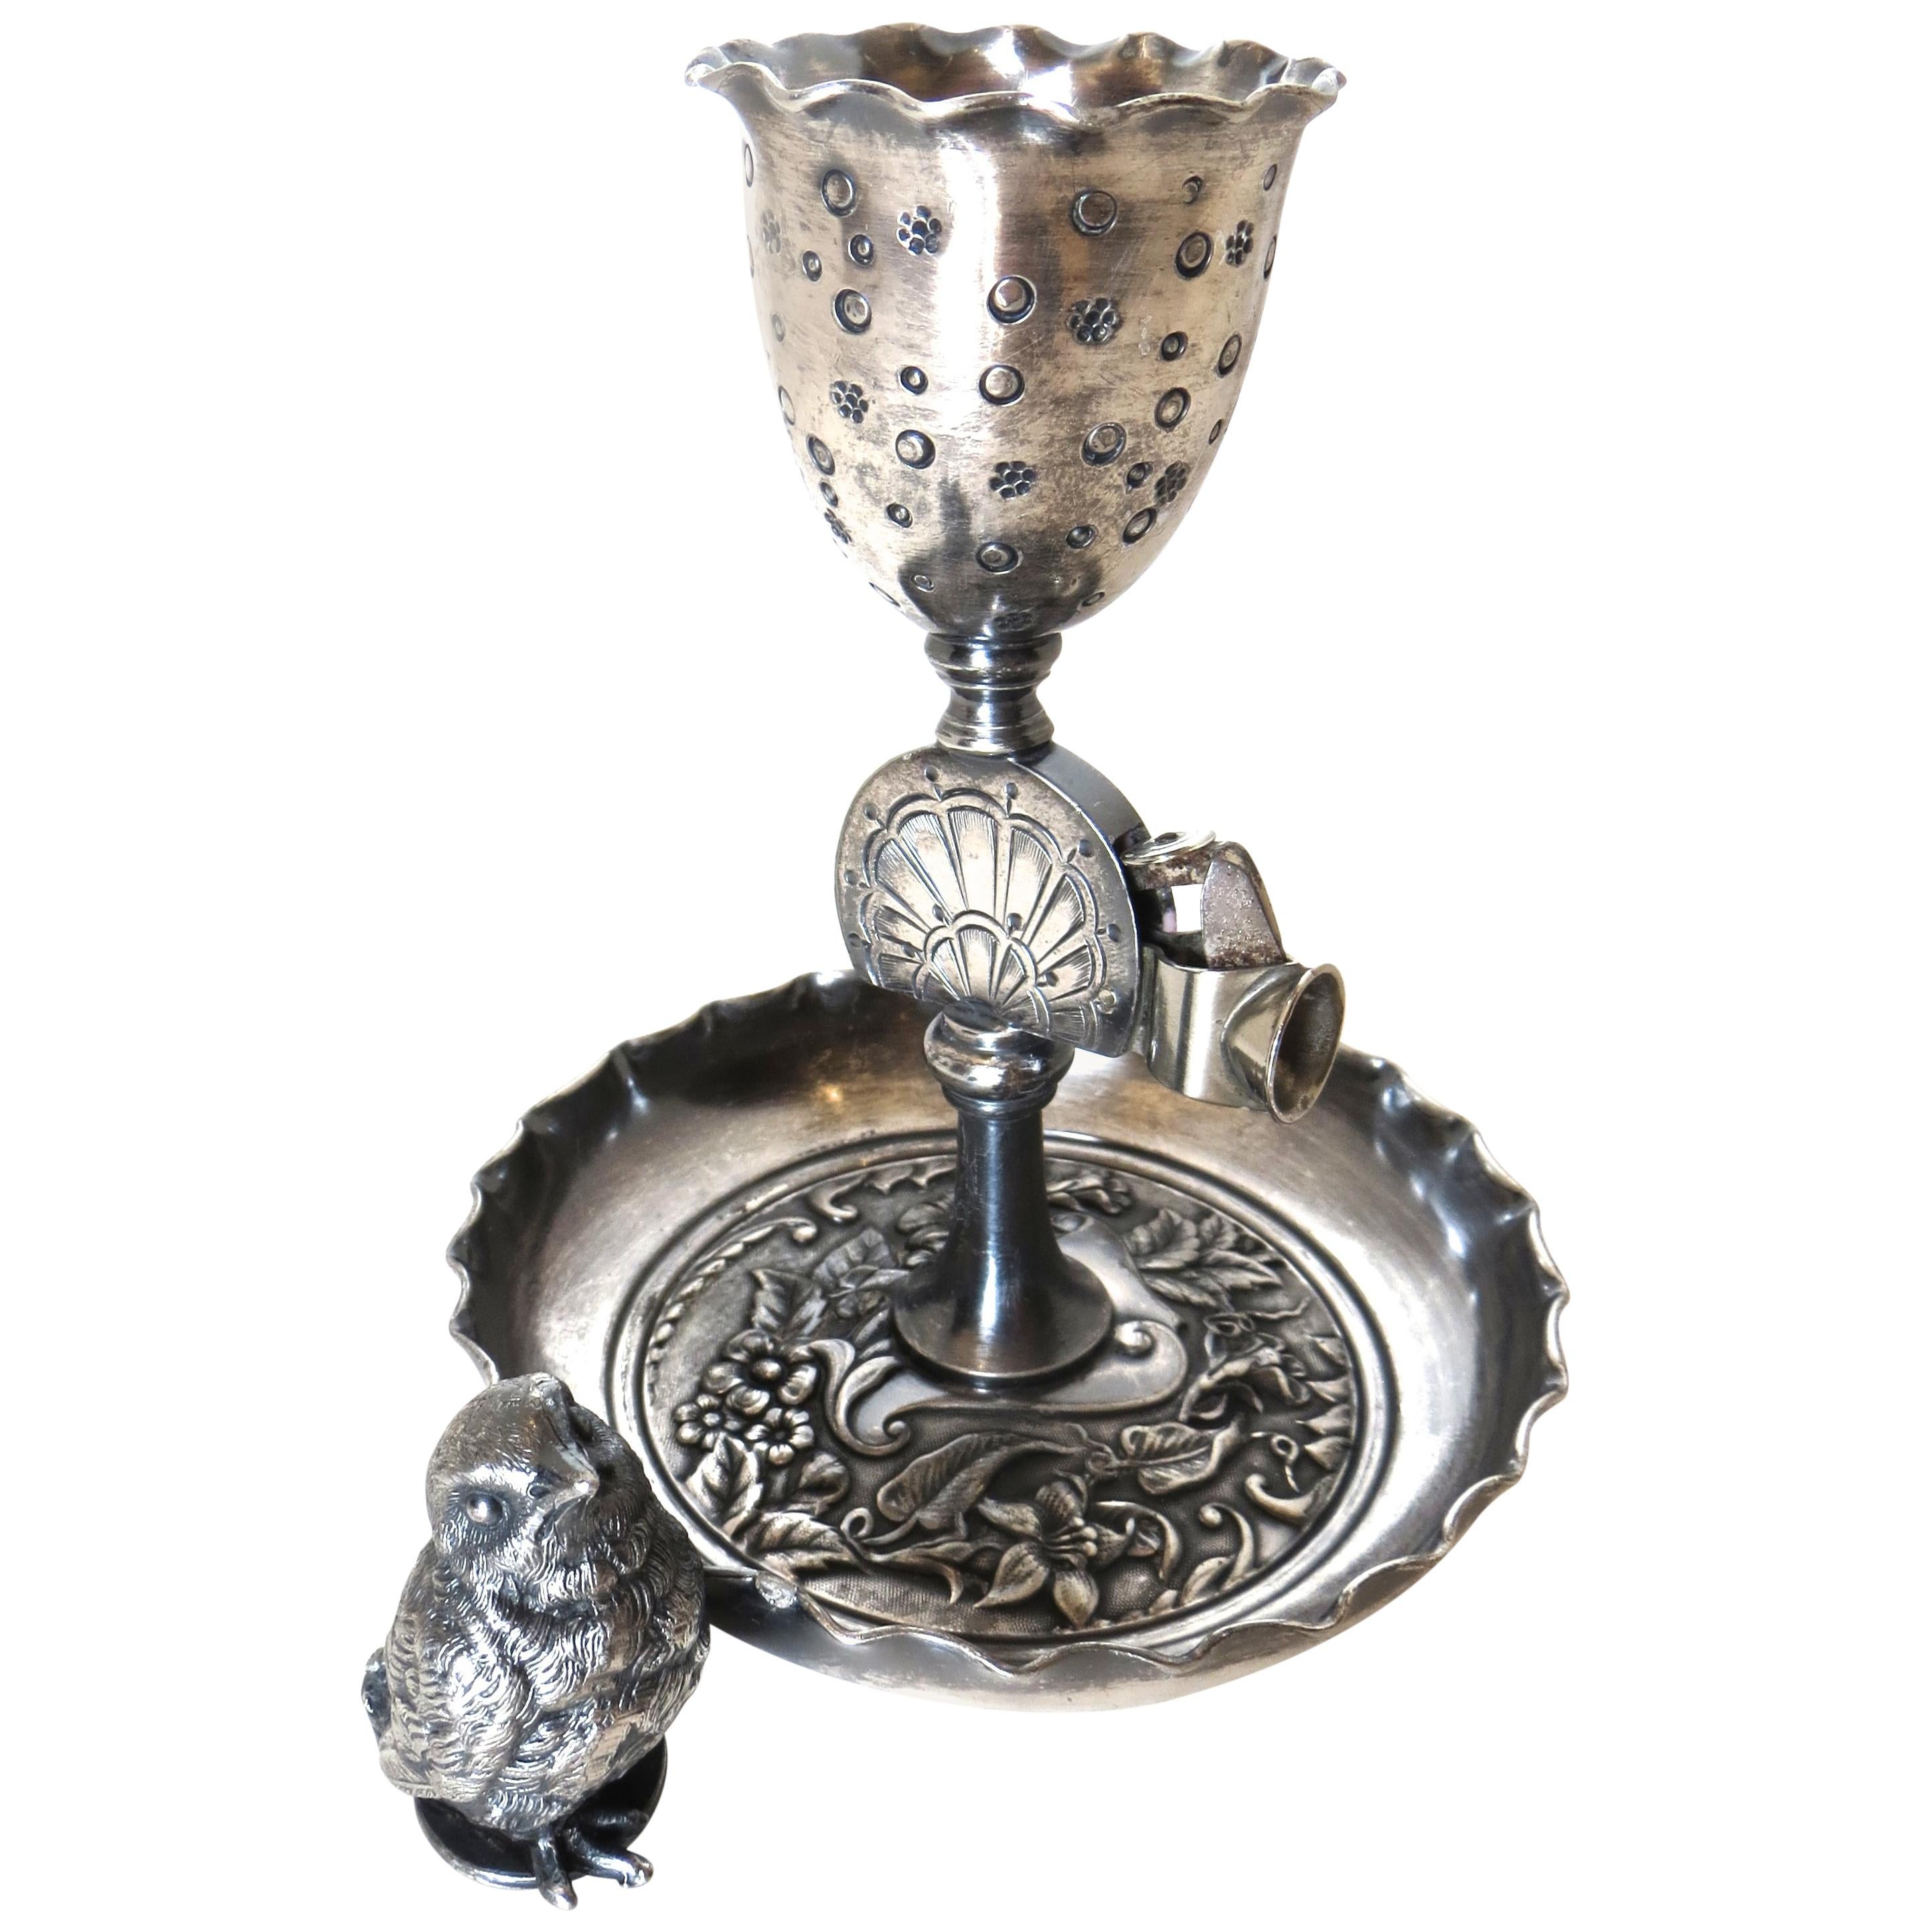 Silver Plated Combination Cigar Cutter/Bud Vase by Derby, Connecticut circa 1885